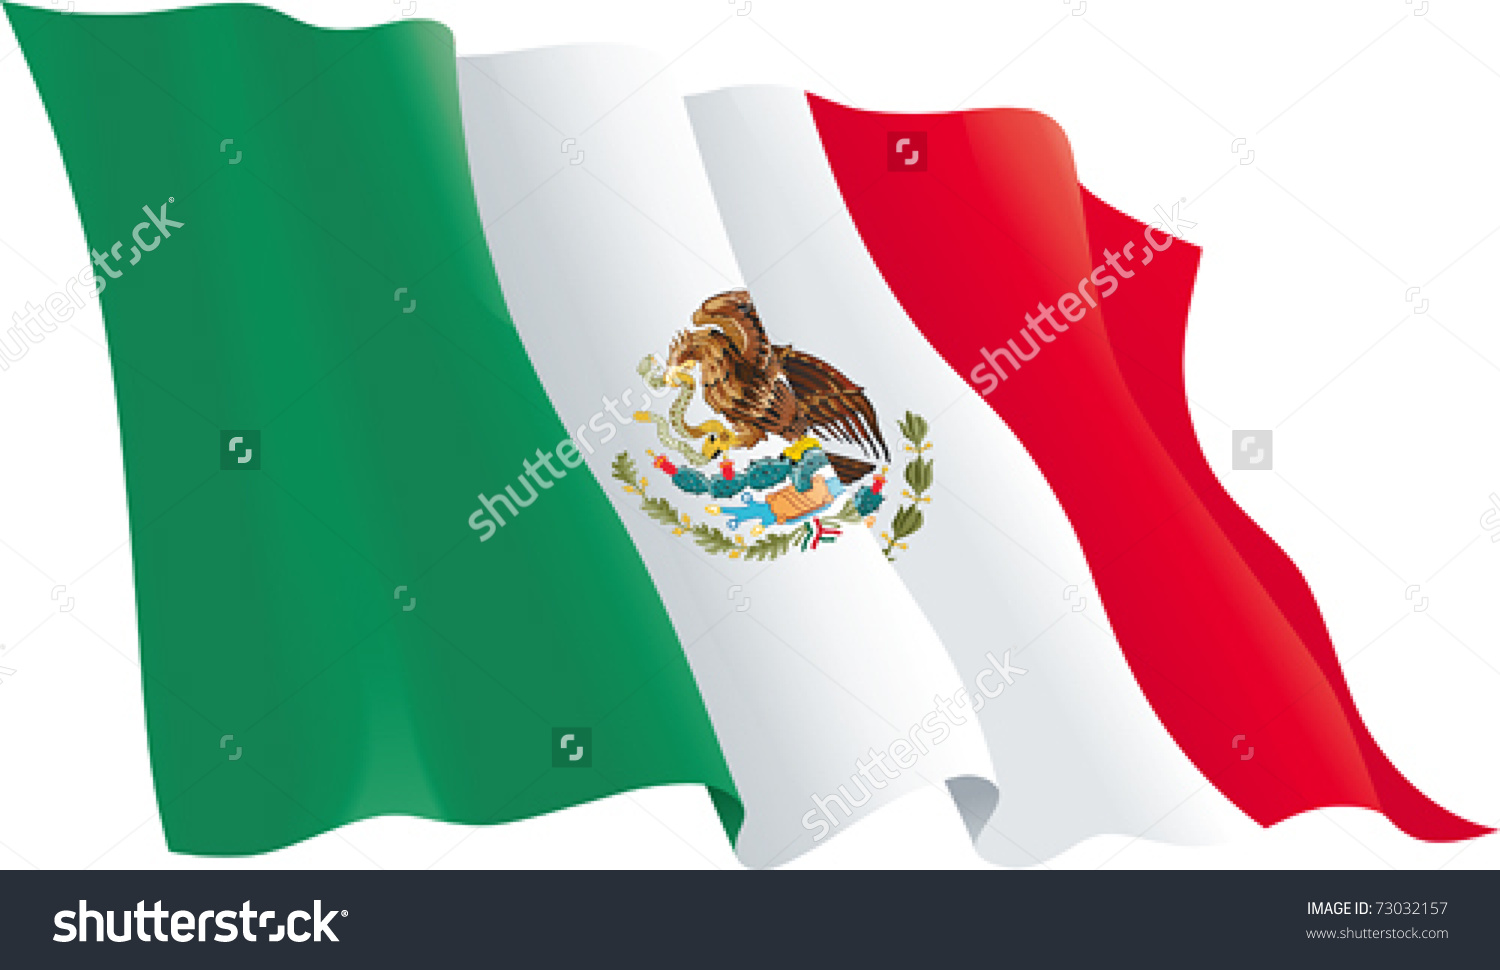 Flag Of Mexico HD wallpapers, Desktop wallpaper - most viewed